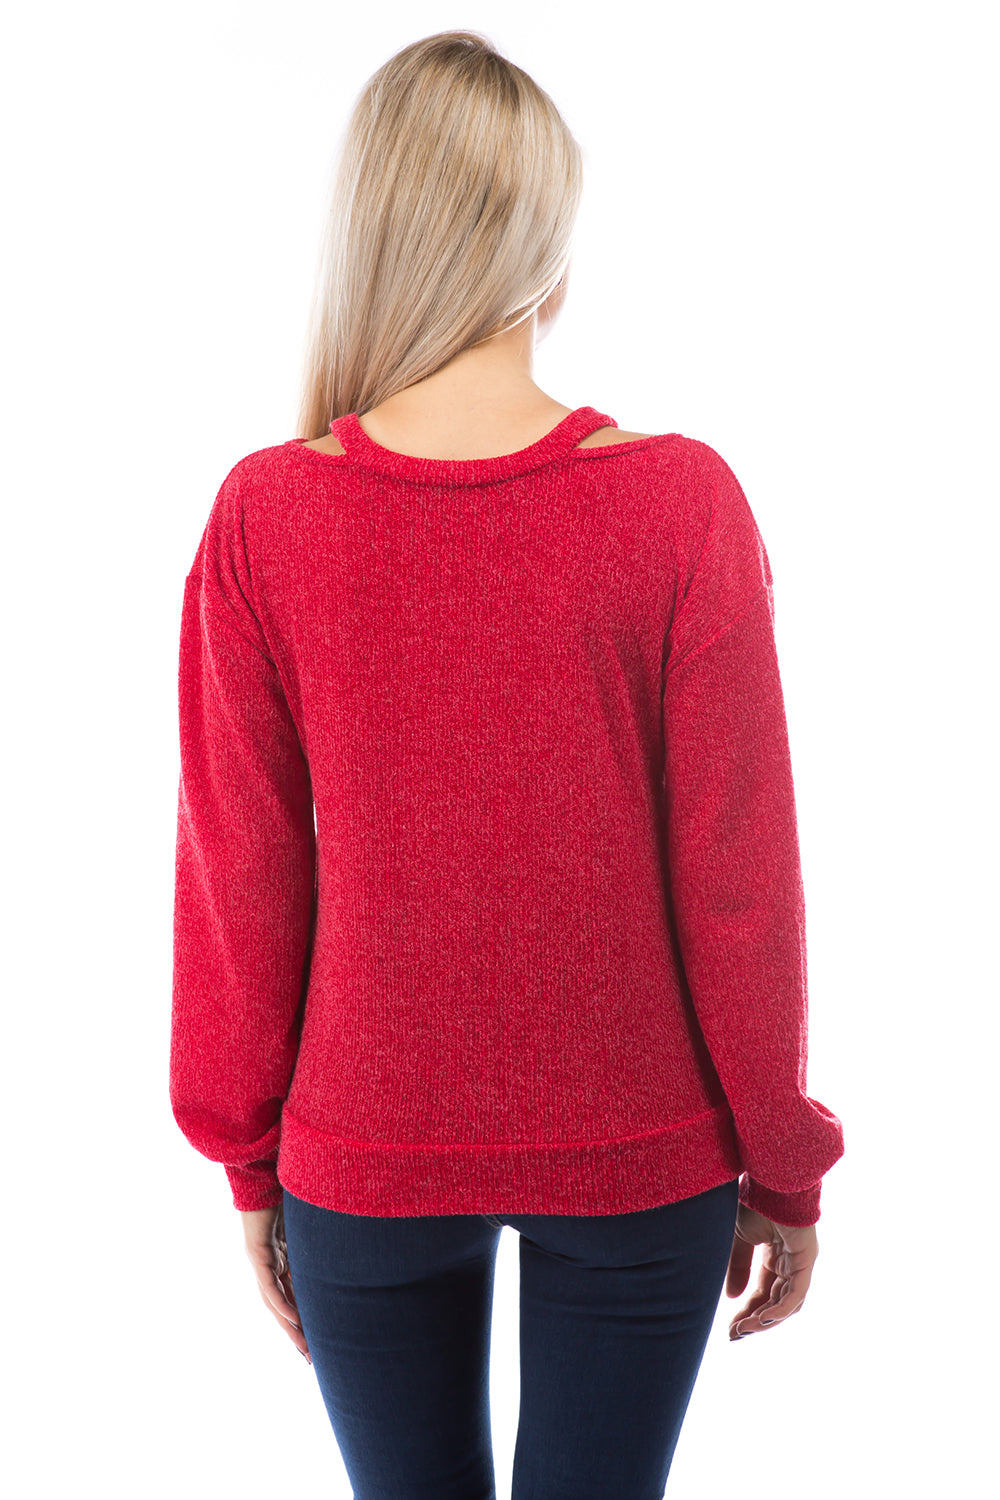 SYBIL COLD SHOULDER TOP (RED CORDED SWEATER)-VT2869